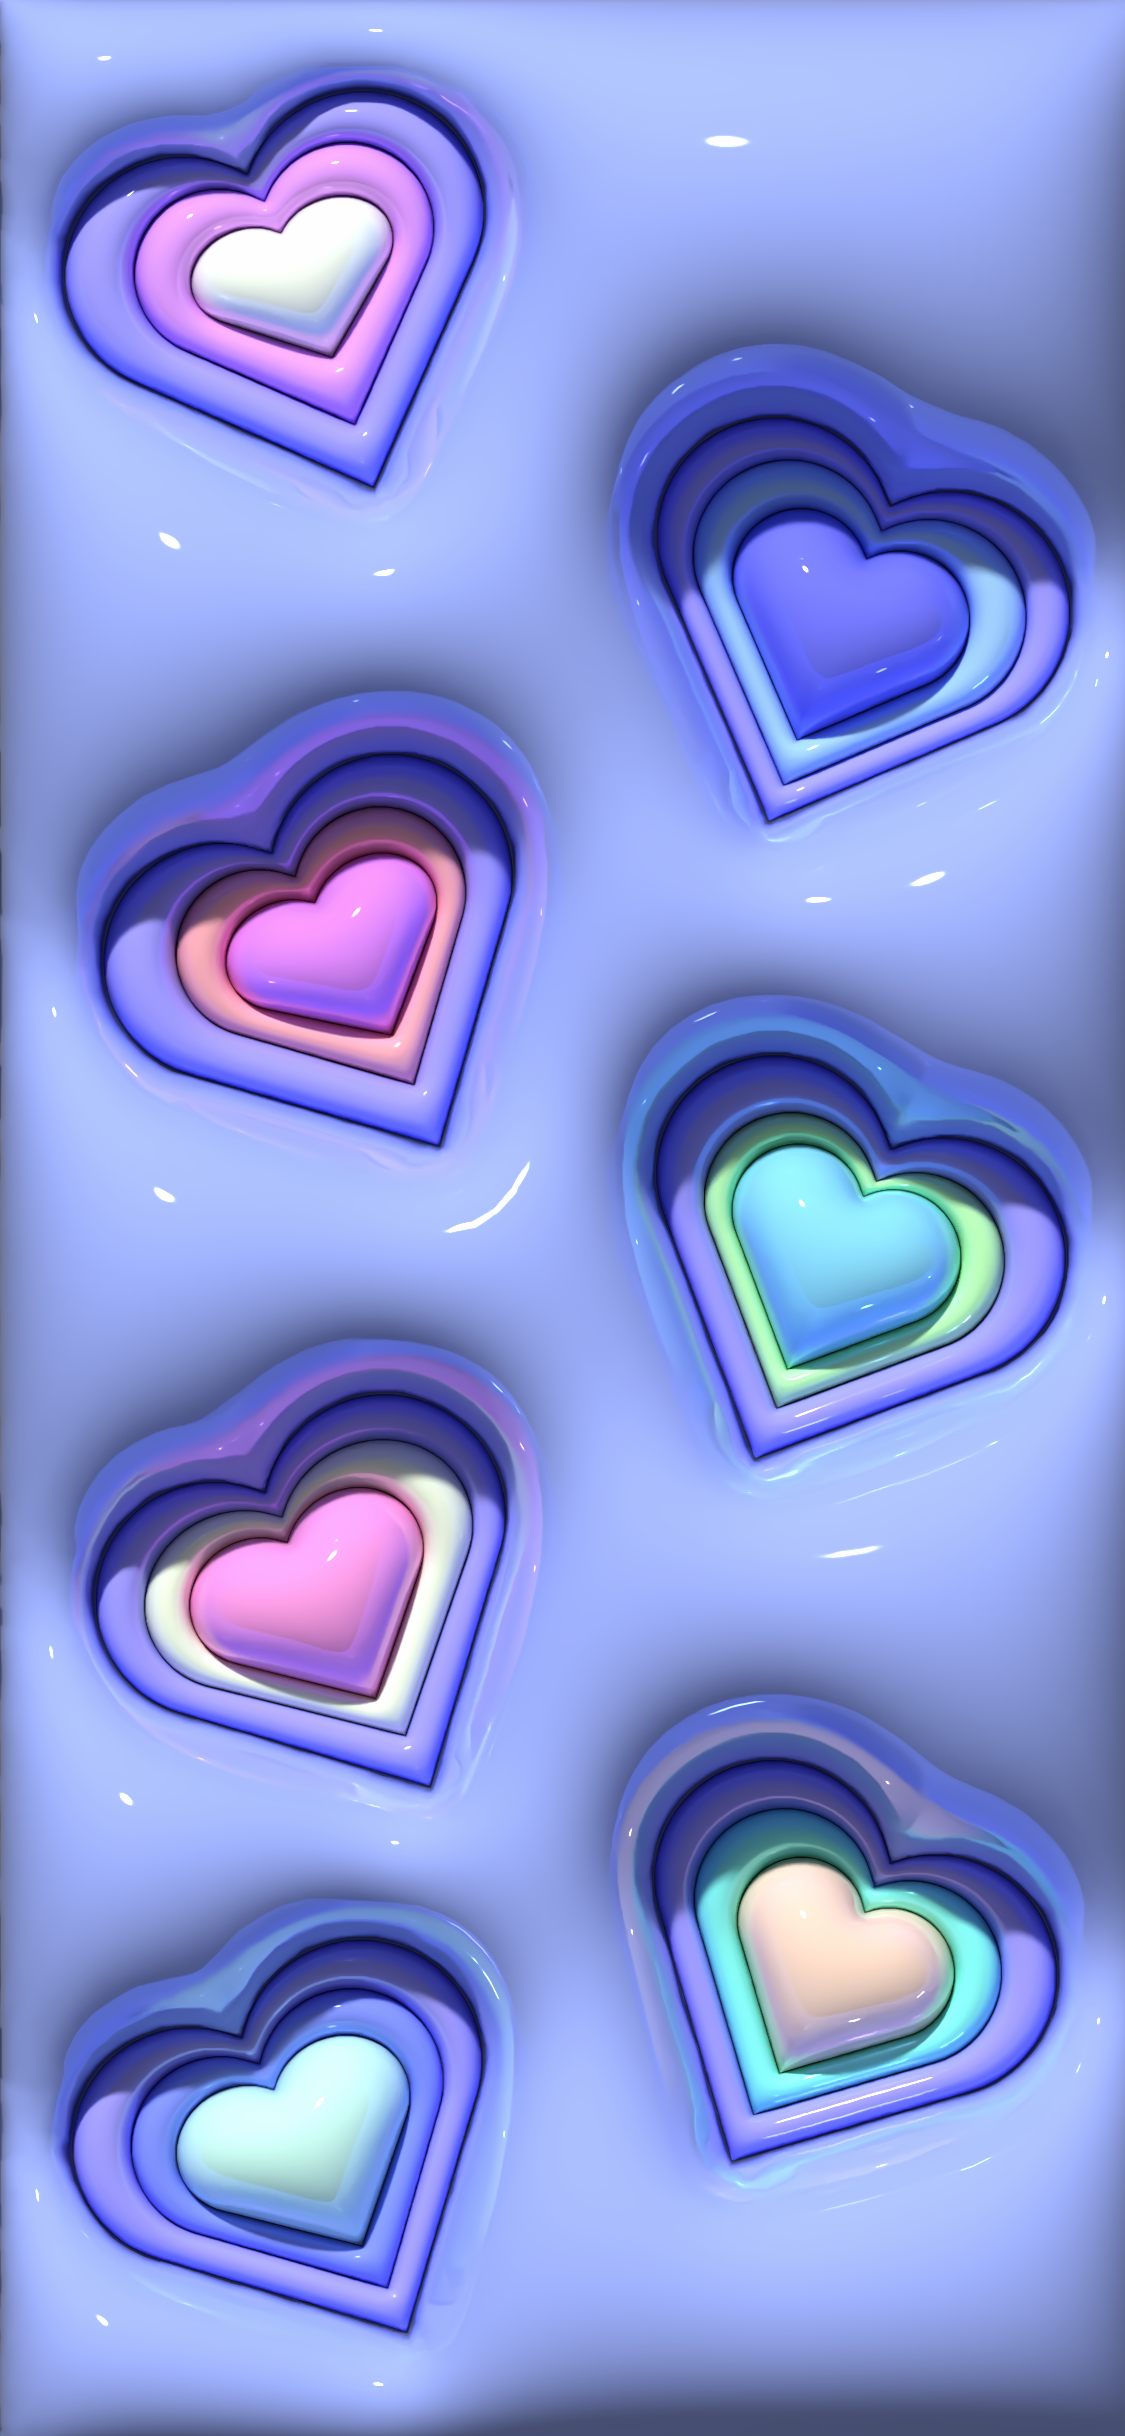 iPhone Wallpaper 3d Hearts by Michelle Mabelle on Dribbble